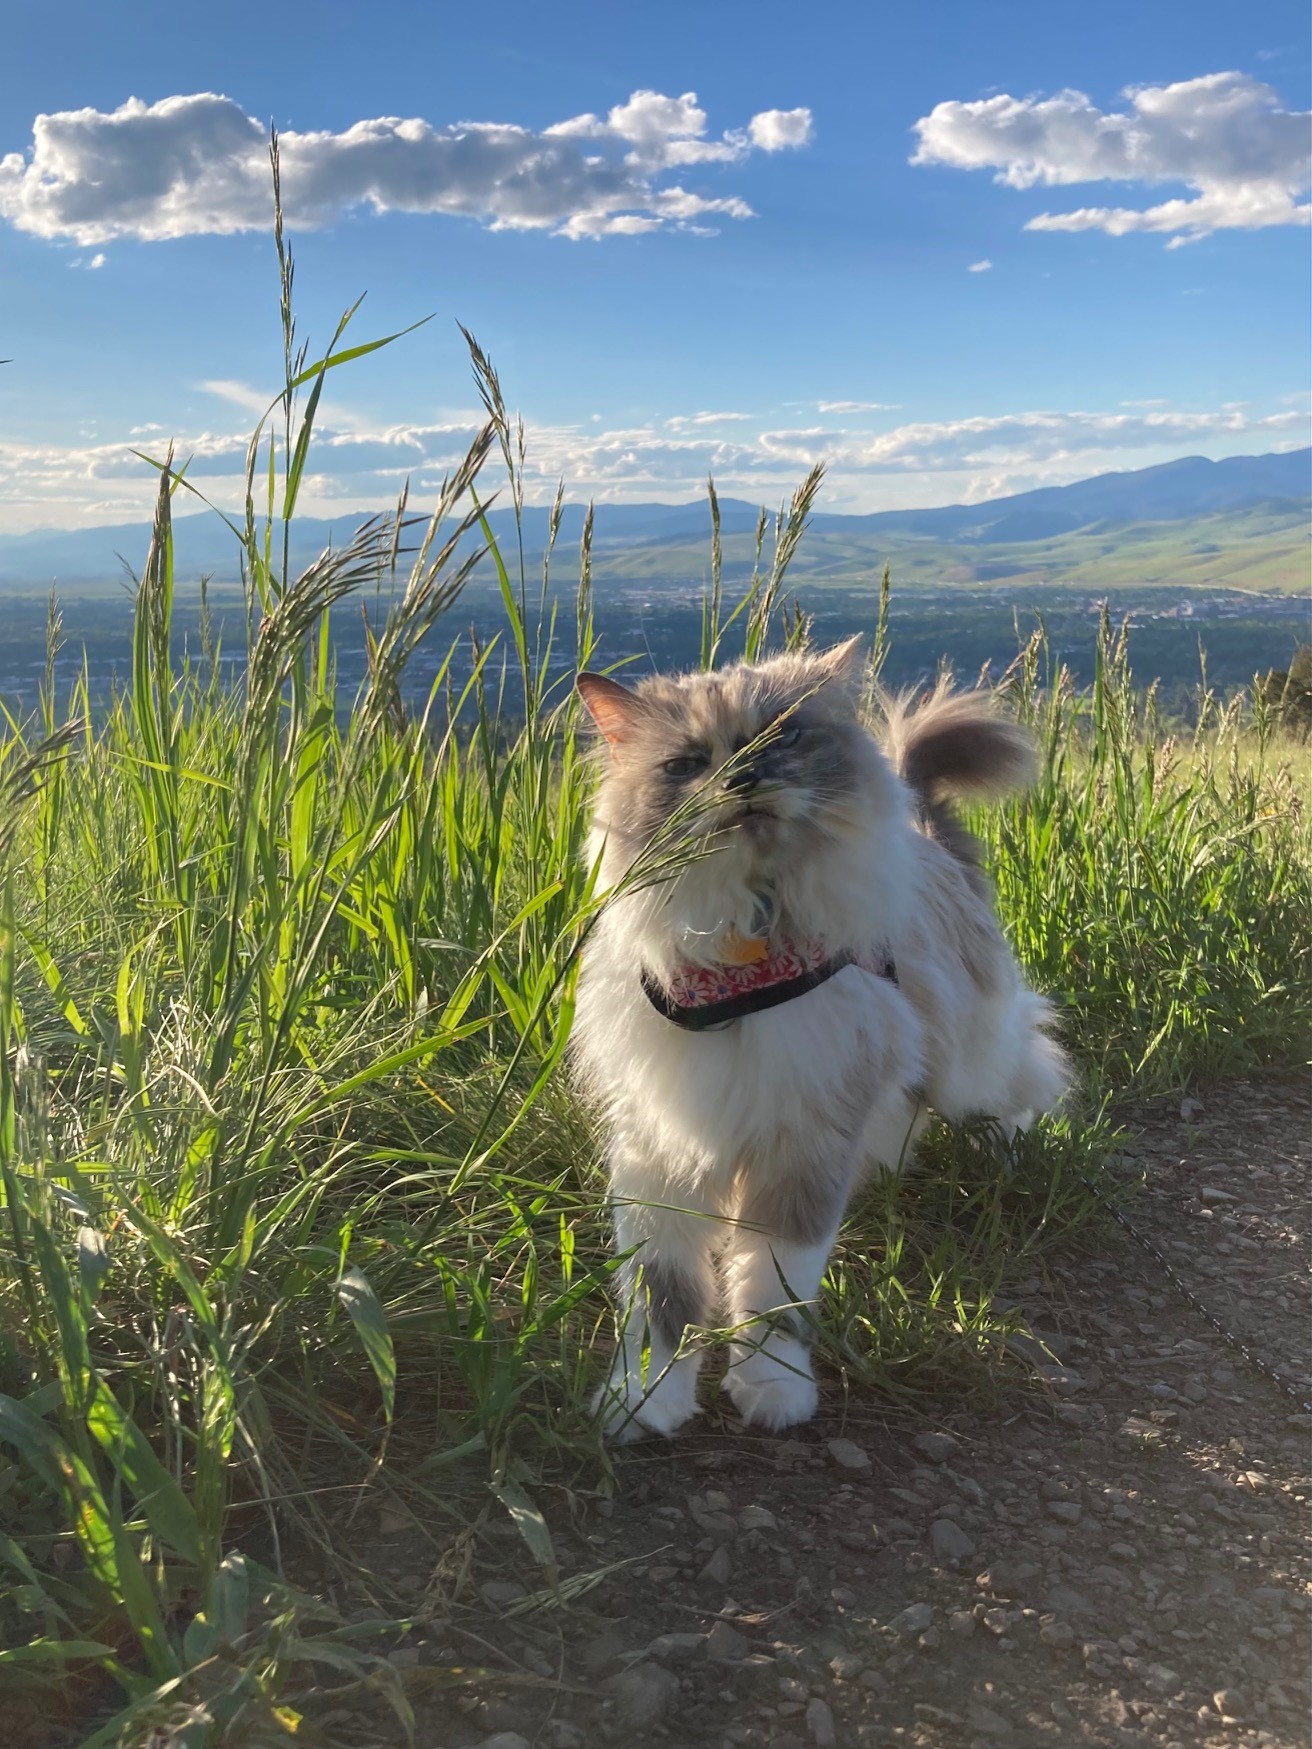 A fluffy white cat prepares to eat green grass along the trail